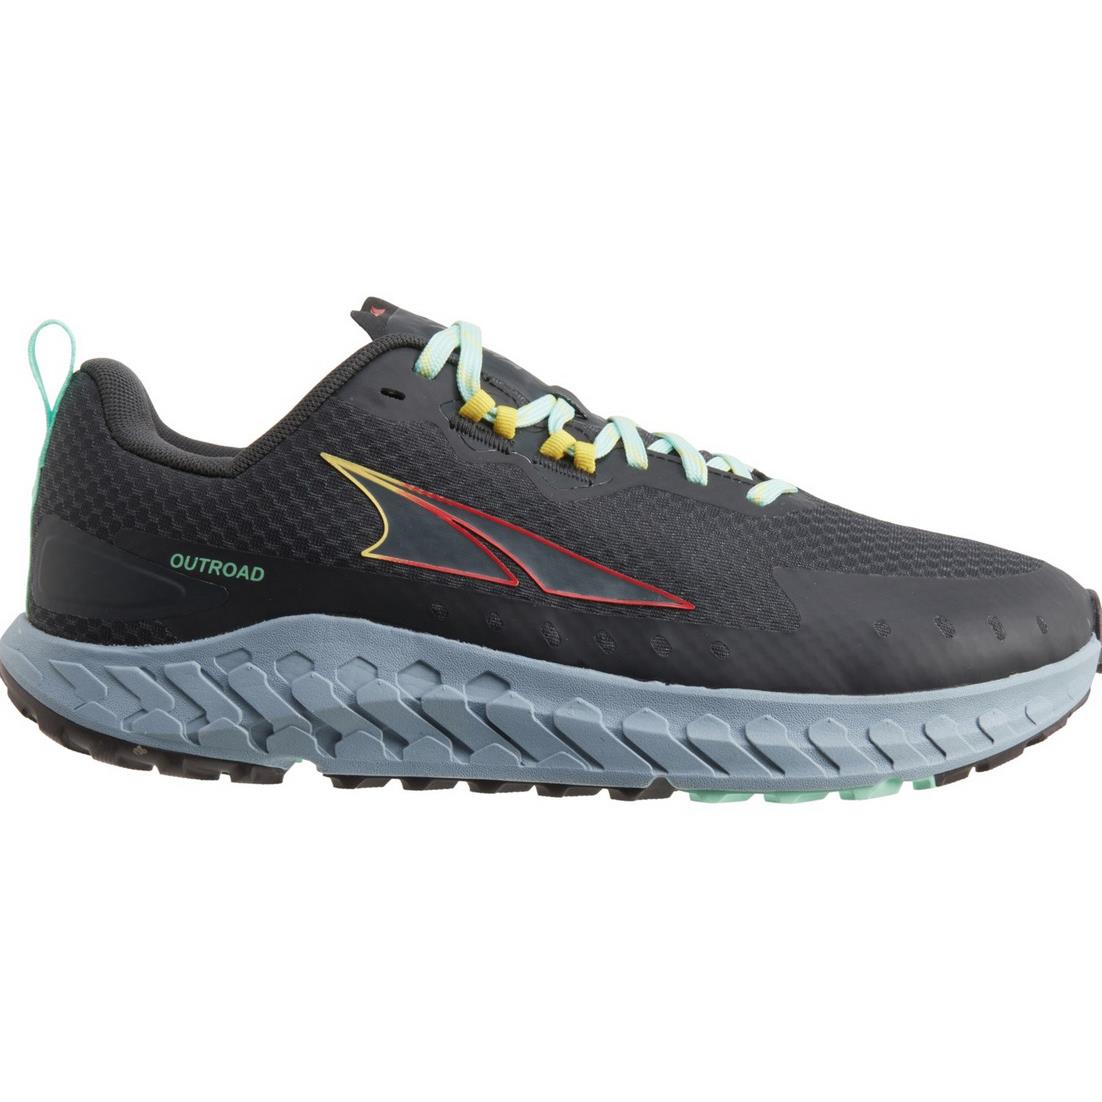 Altra Men`s Outroad Trail Running Shoes - Dark Gray/blue